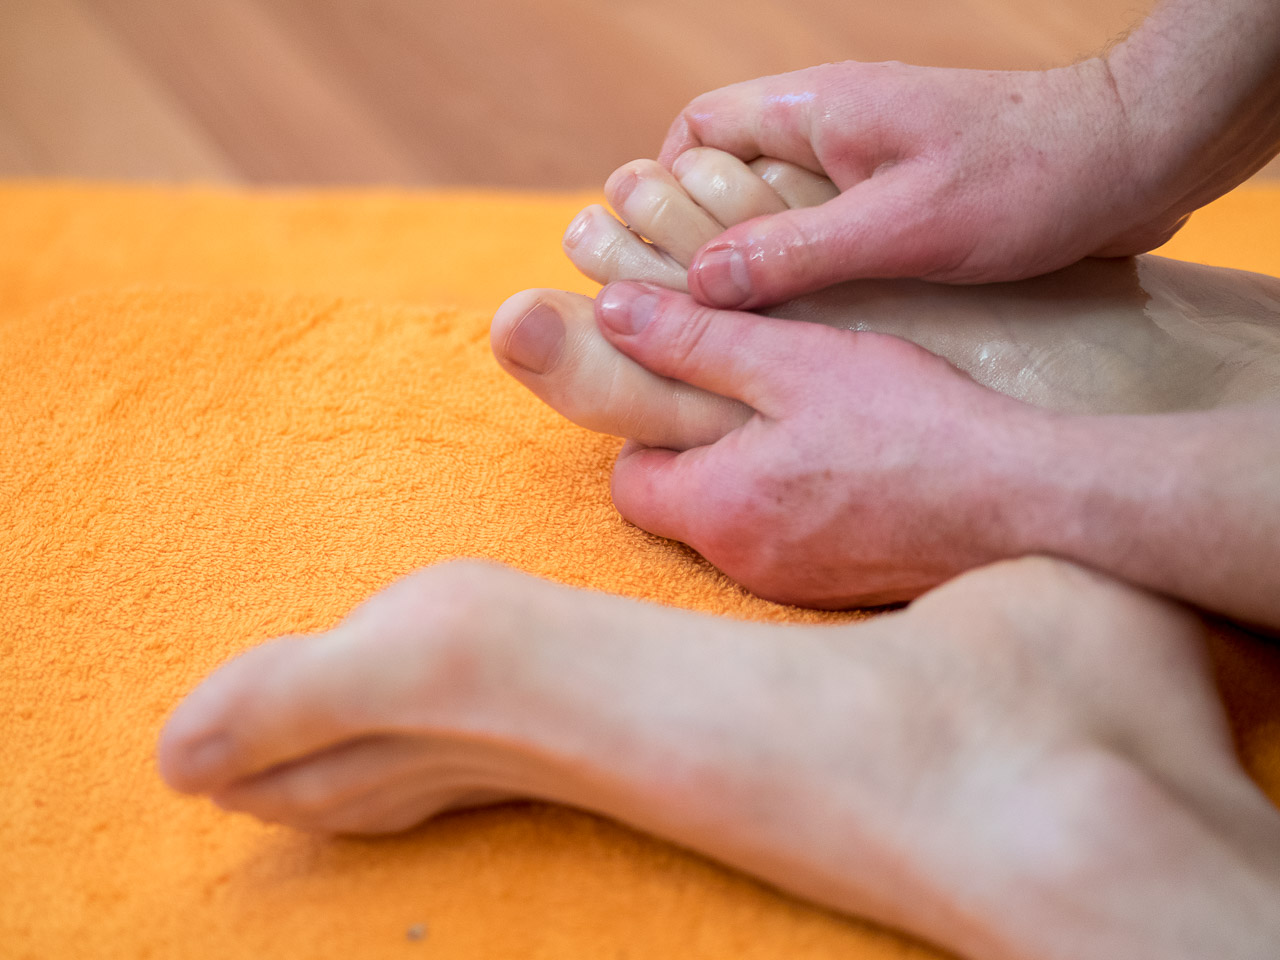 Wellness massage for men, foot massage for men. Whether firm, gentle or sensual, foot massage has a lot of enthusiastic fans! What's more, oil helps to nourish this part of our body where the skin is often particularly dry.